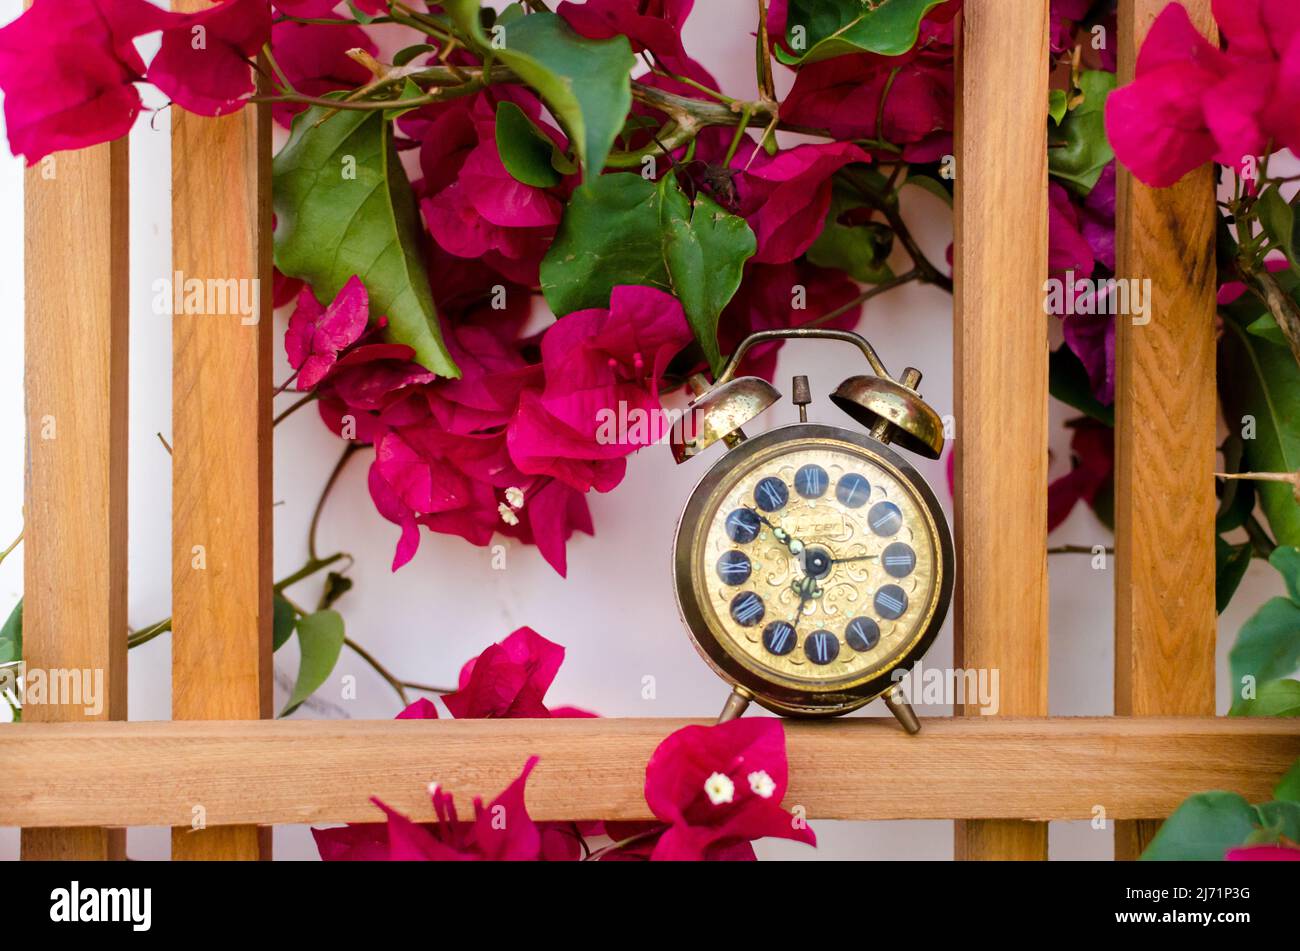 Small, Vintage, Gold Alarm Clock with Bells, sitting on the Wood Frame Trellis with Bougainvillea Plant and Purple Magenta Flower Blooms Stock Photo